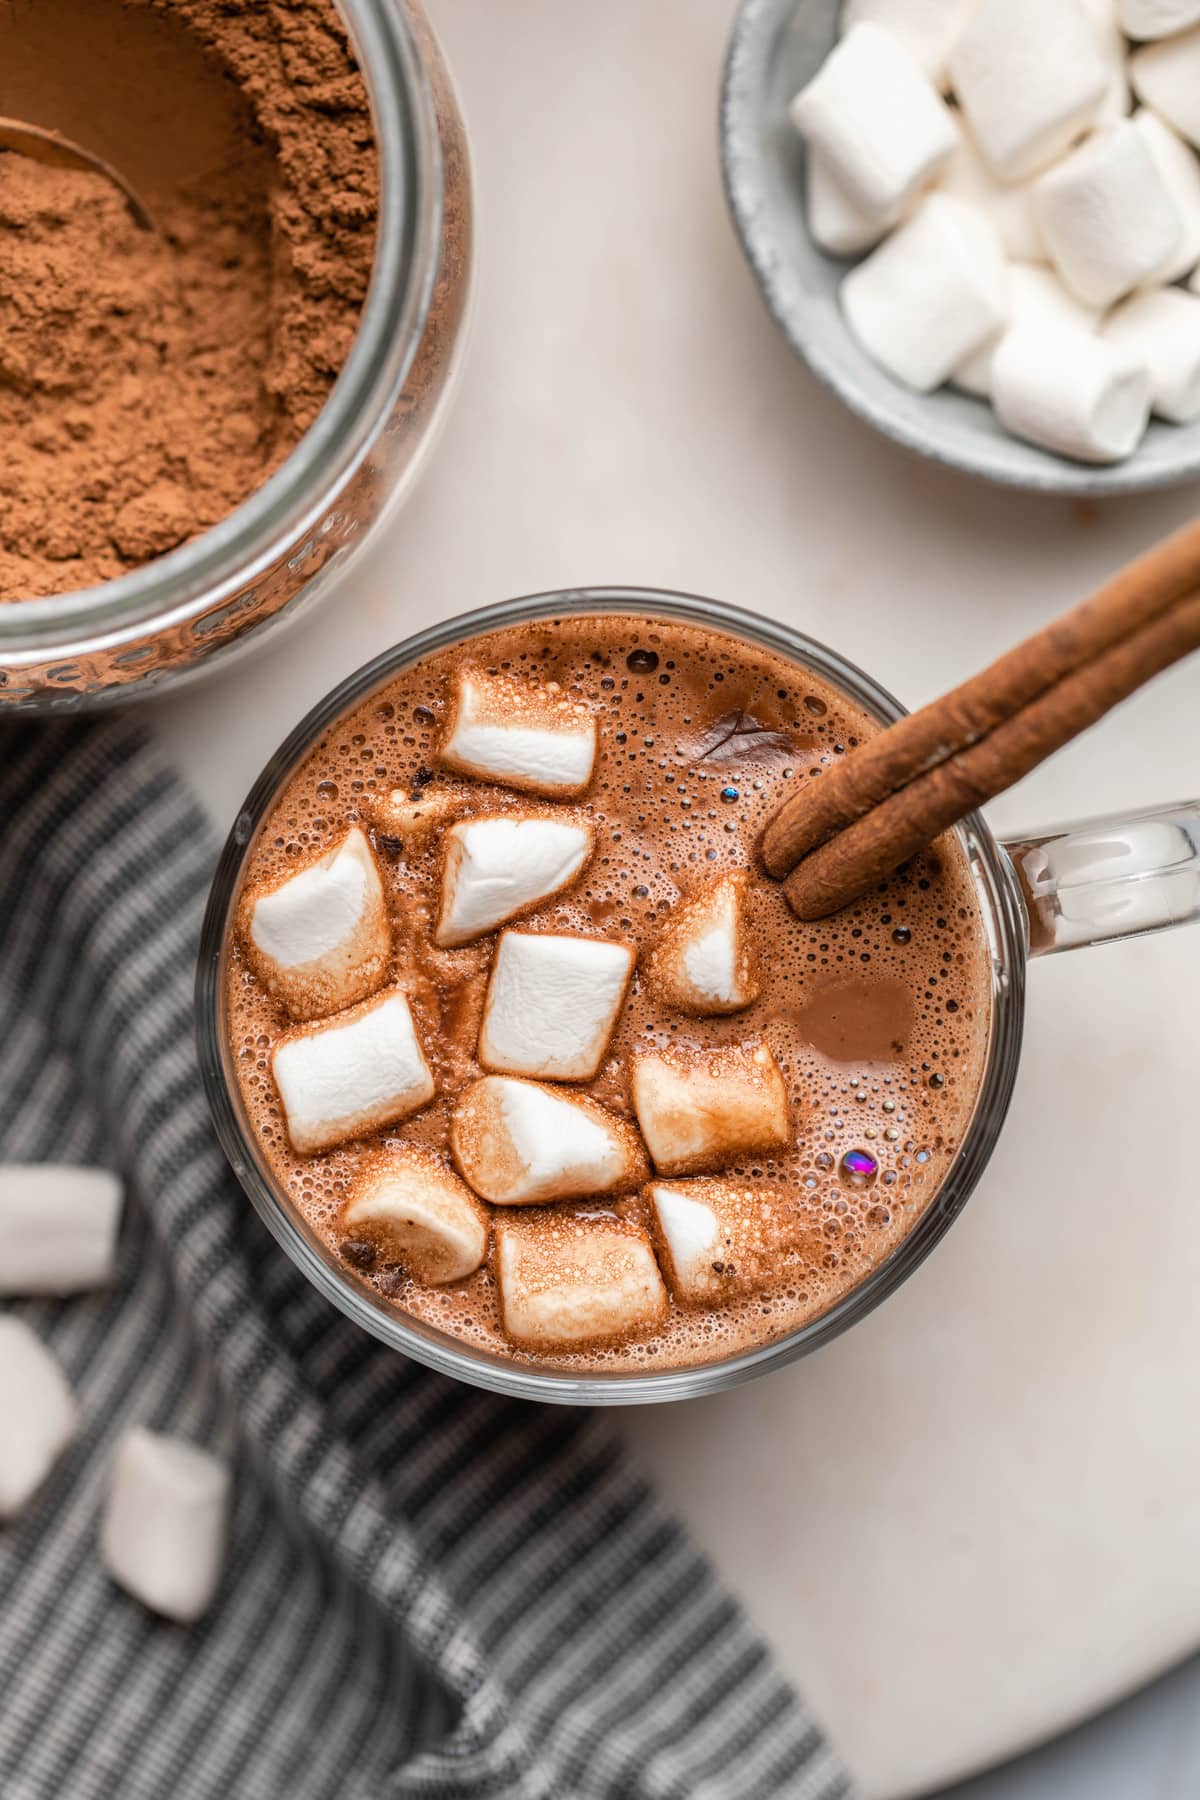 hot chocolate with marshmallows and cinnamon stick in glass mug on white marble background